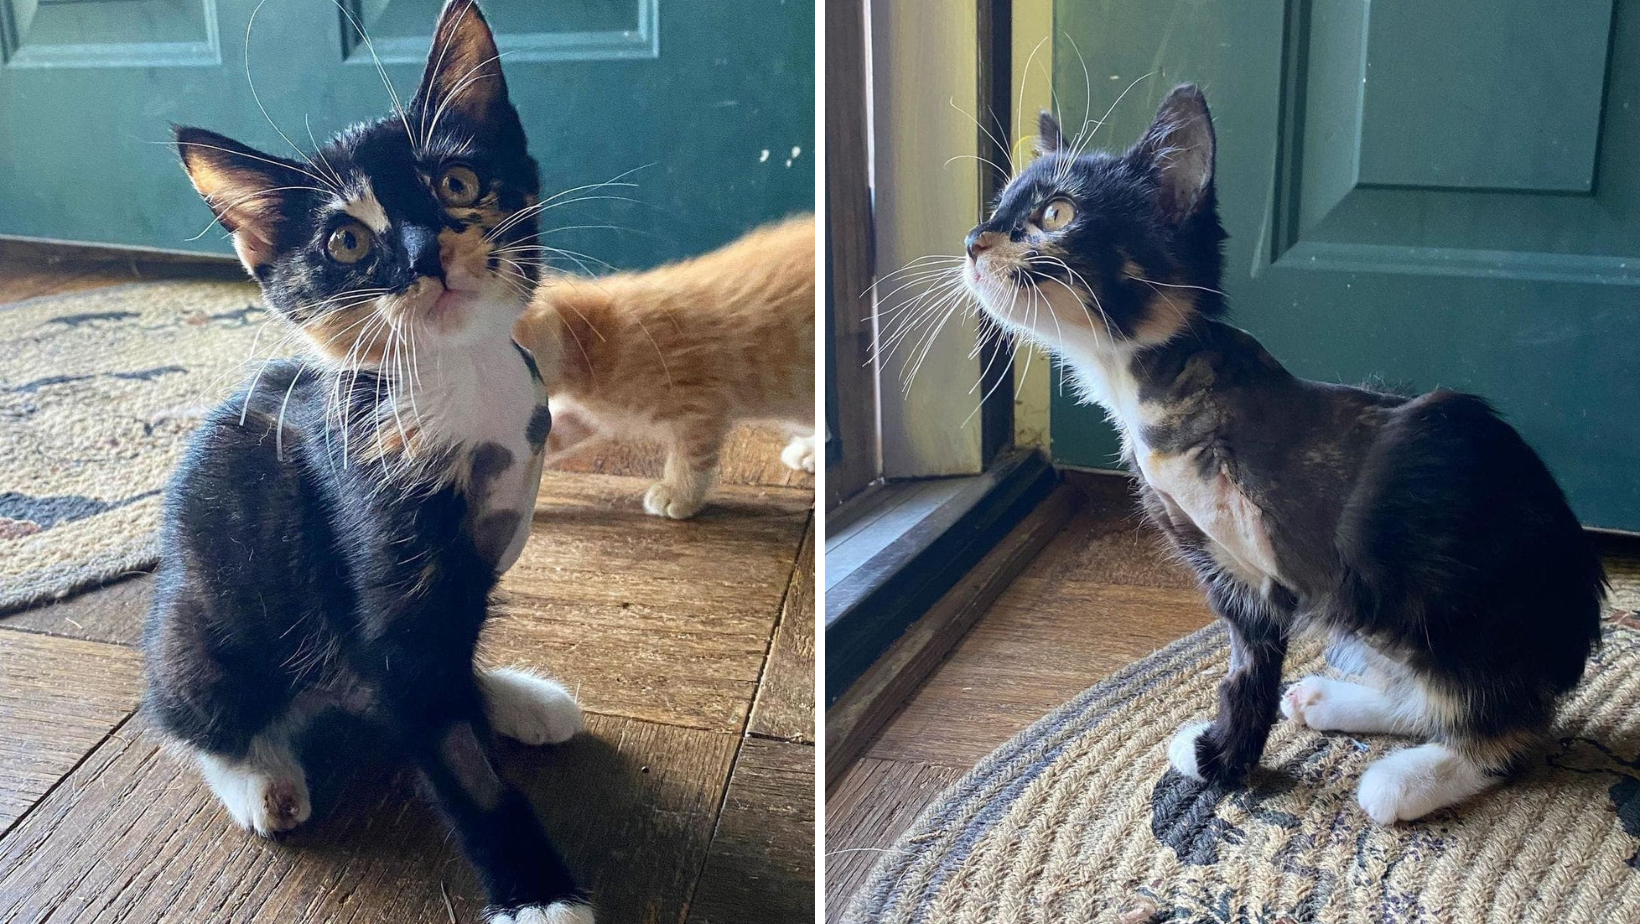 This Is Summer A Kitten Hit By A Car But She Doesn't Let Her Injuries Change Her Mood